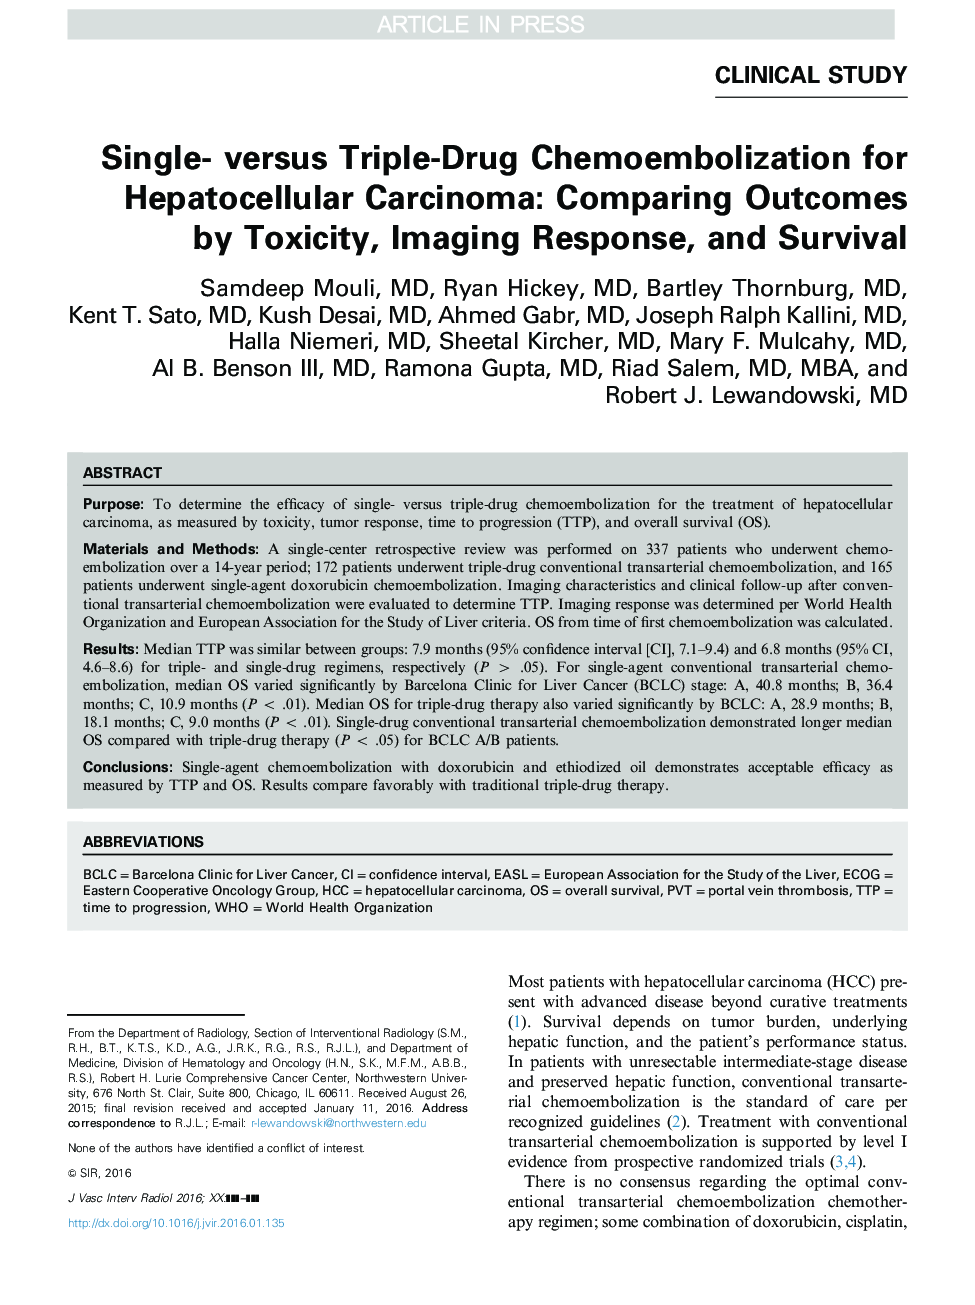 Single- versus Triple-Drug Chemoembolization for Hepatocellular Carcinoma: Comparing Outcomes by Toxicity, Imaging Response, and Survival